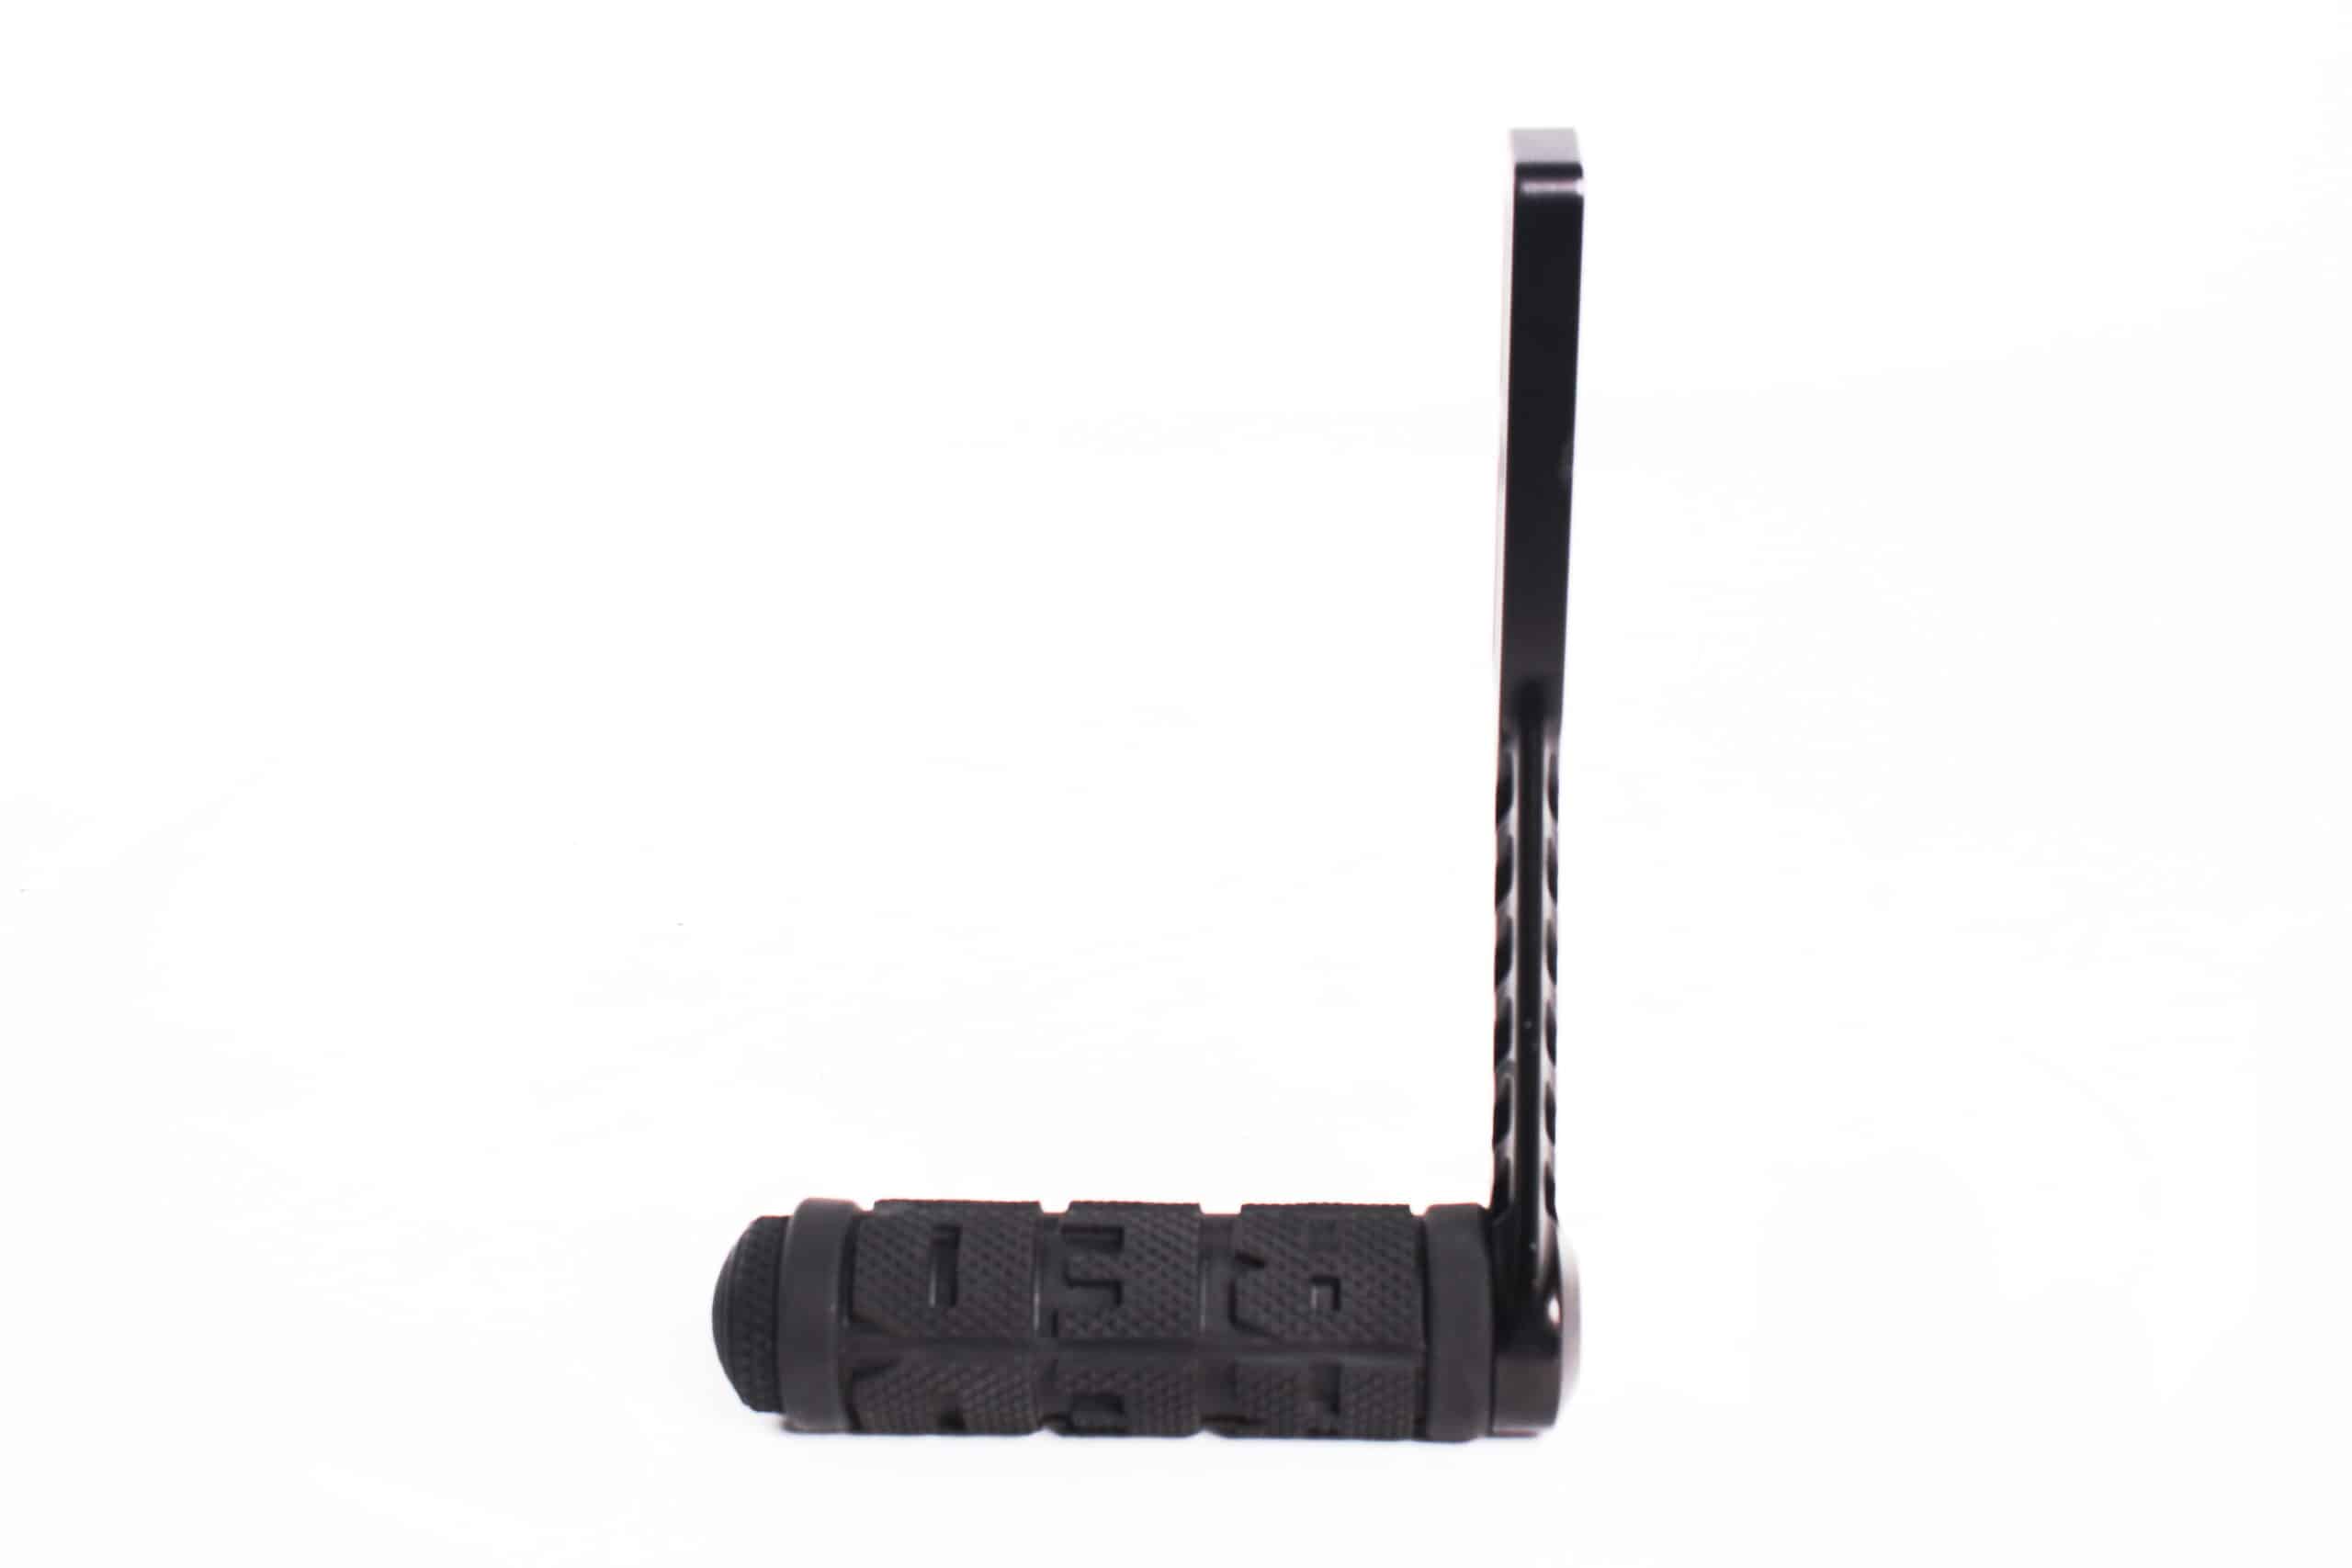 RED DIGITAL CINEMA OUTRIGGER HANDLE for RED EPIC/SCARLET · AVGear